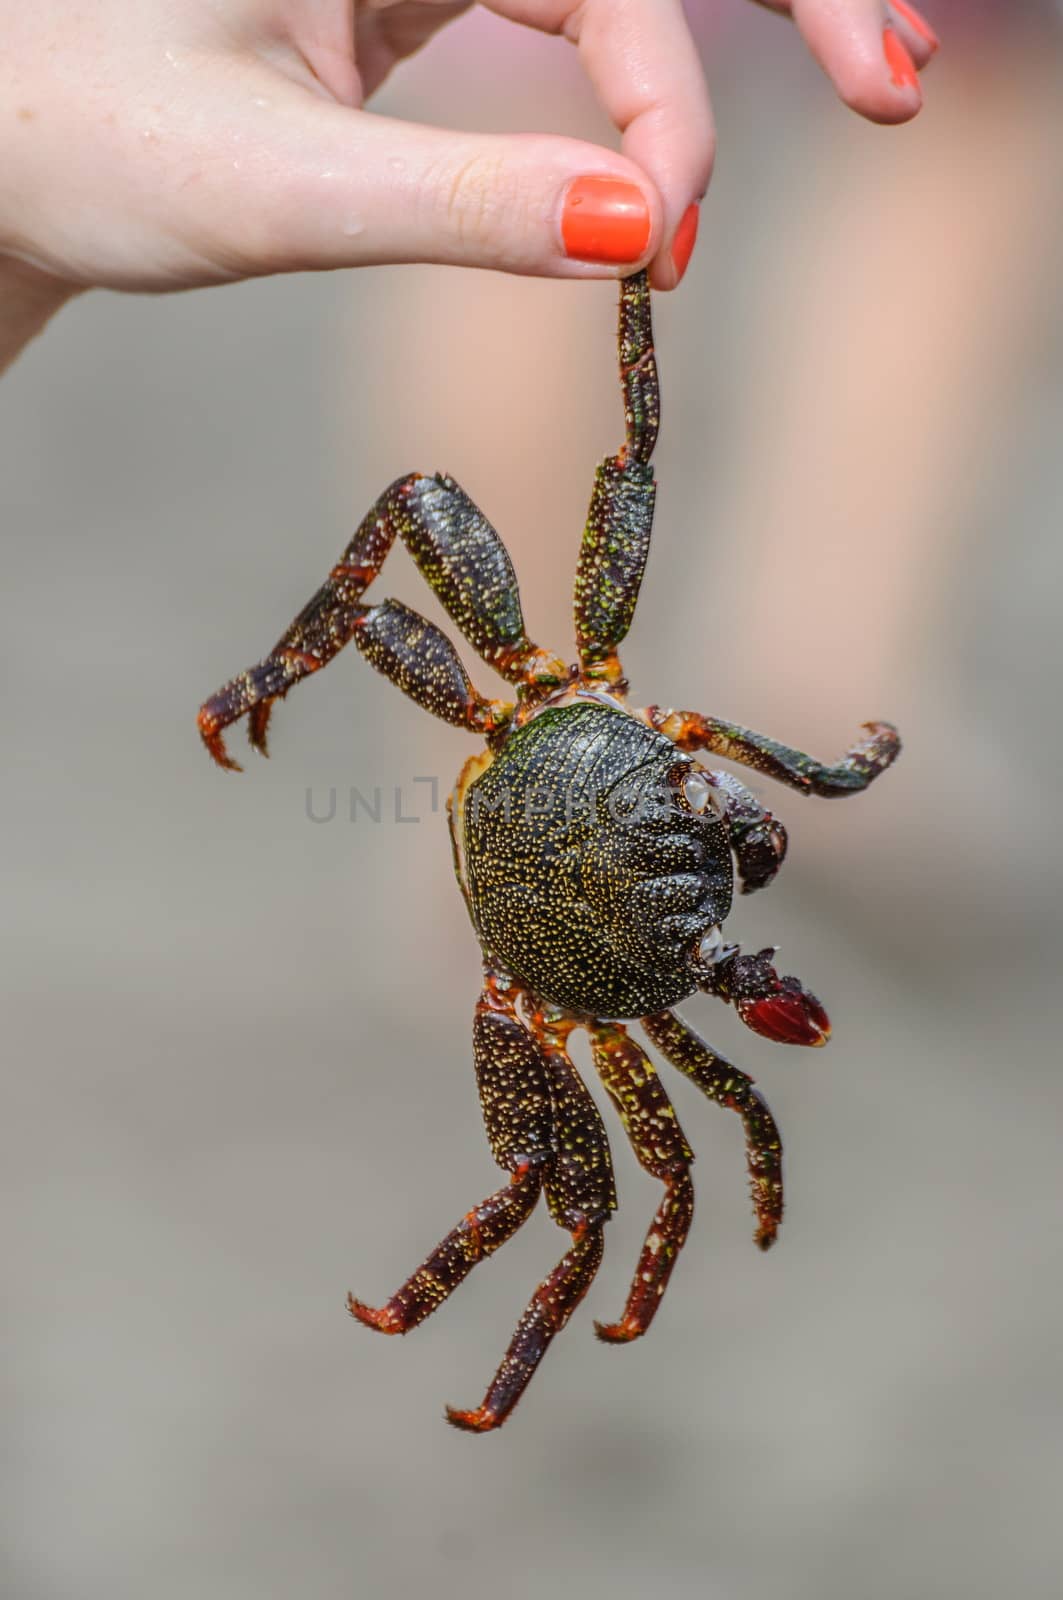 Crab is in girl's hand on the beach by Eagle2308